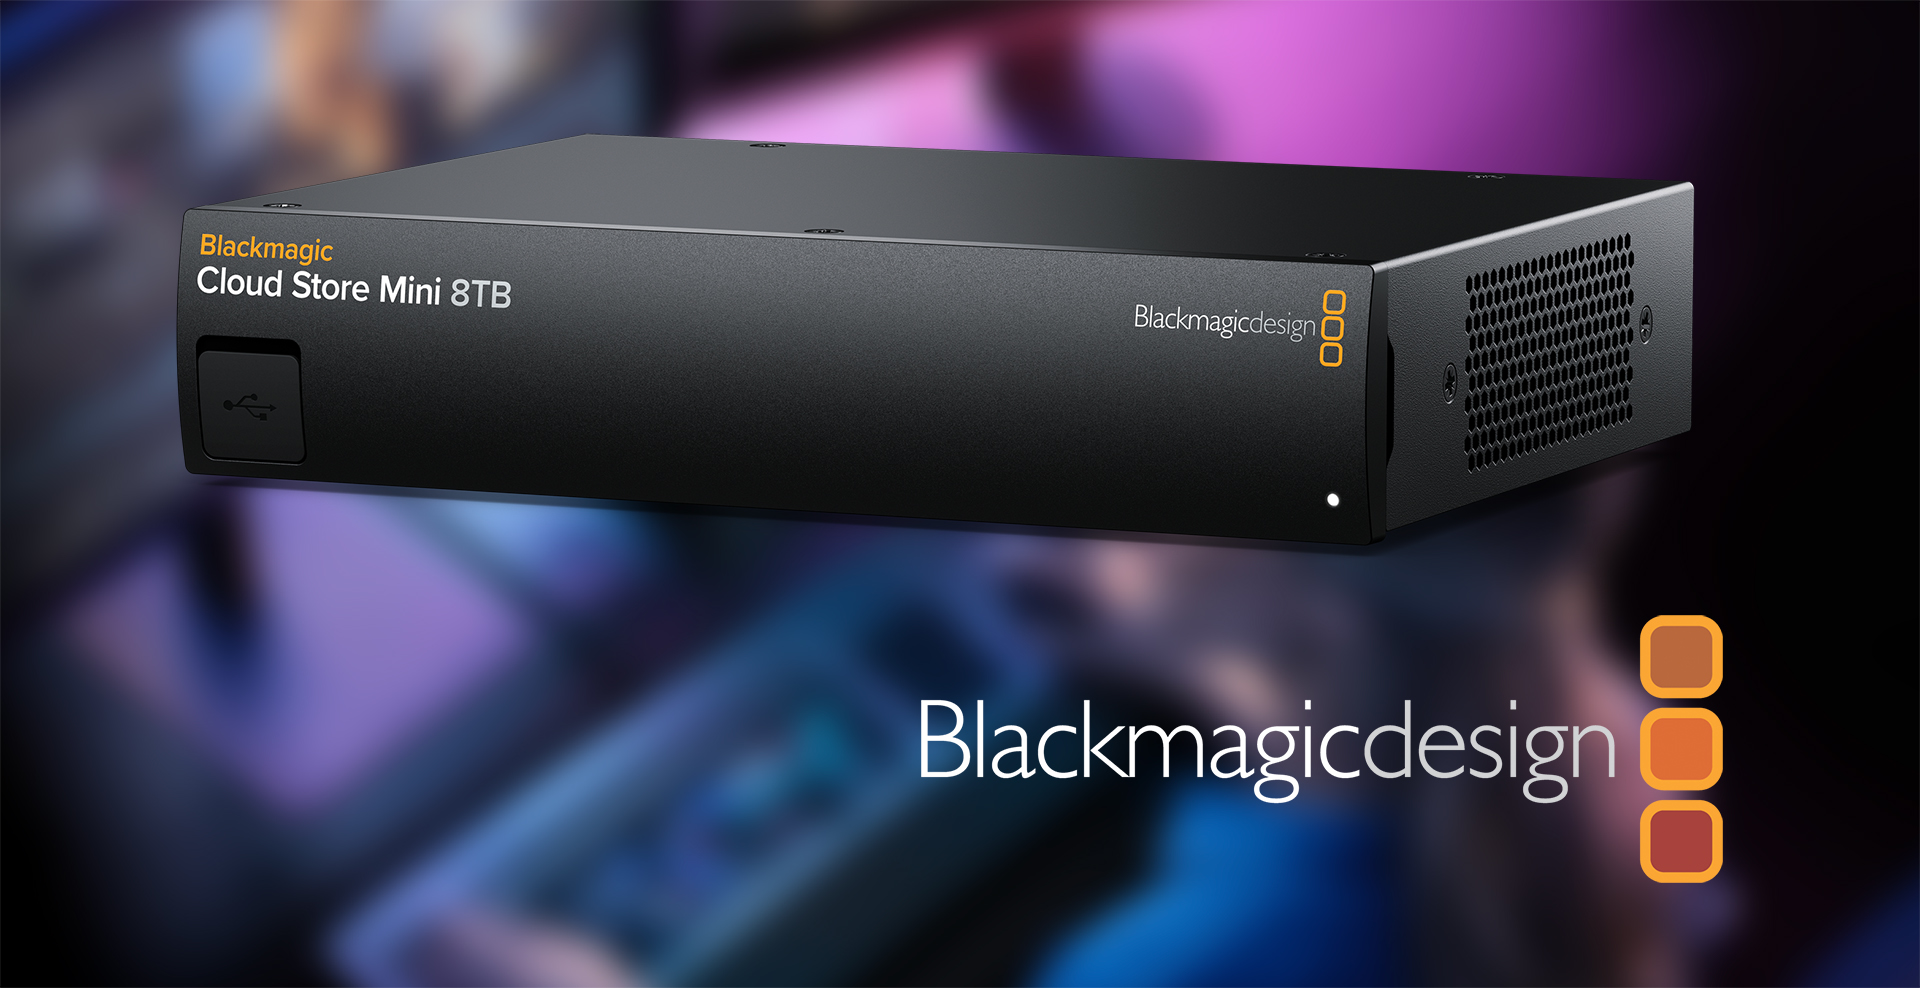 Review: A look at the Blackmagic Cloud Store Mini 5